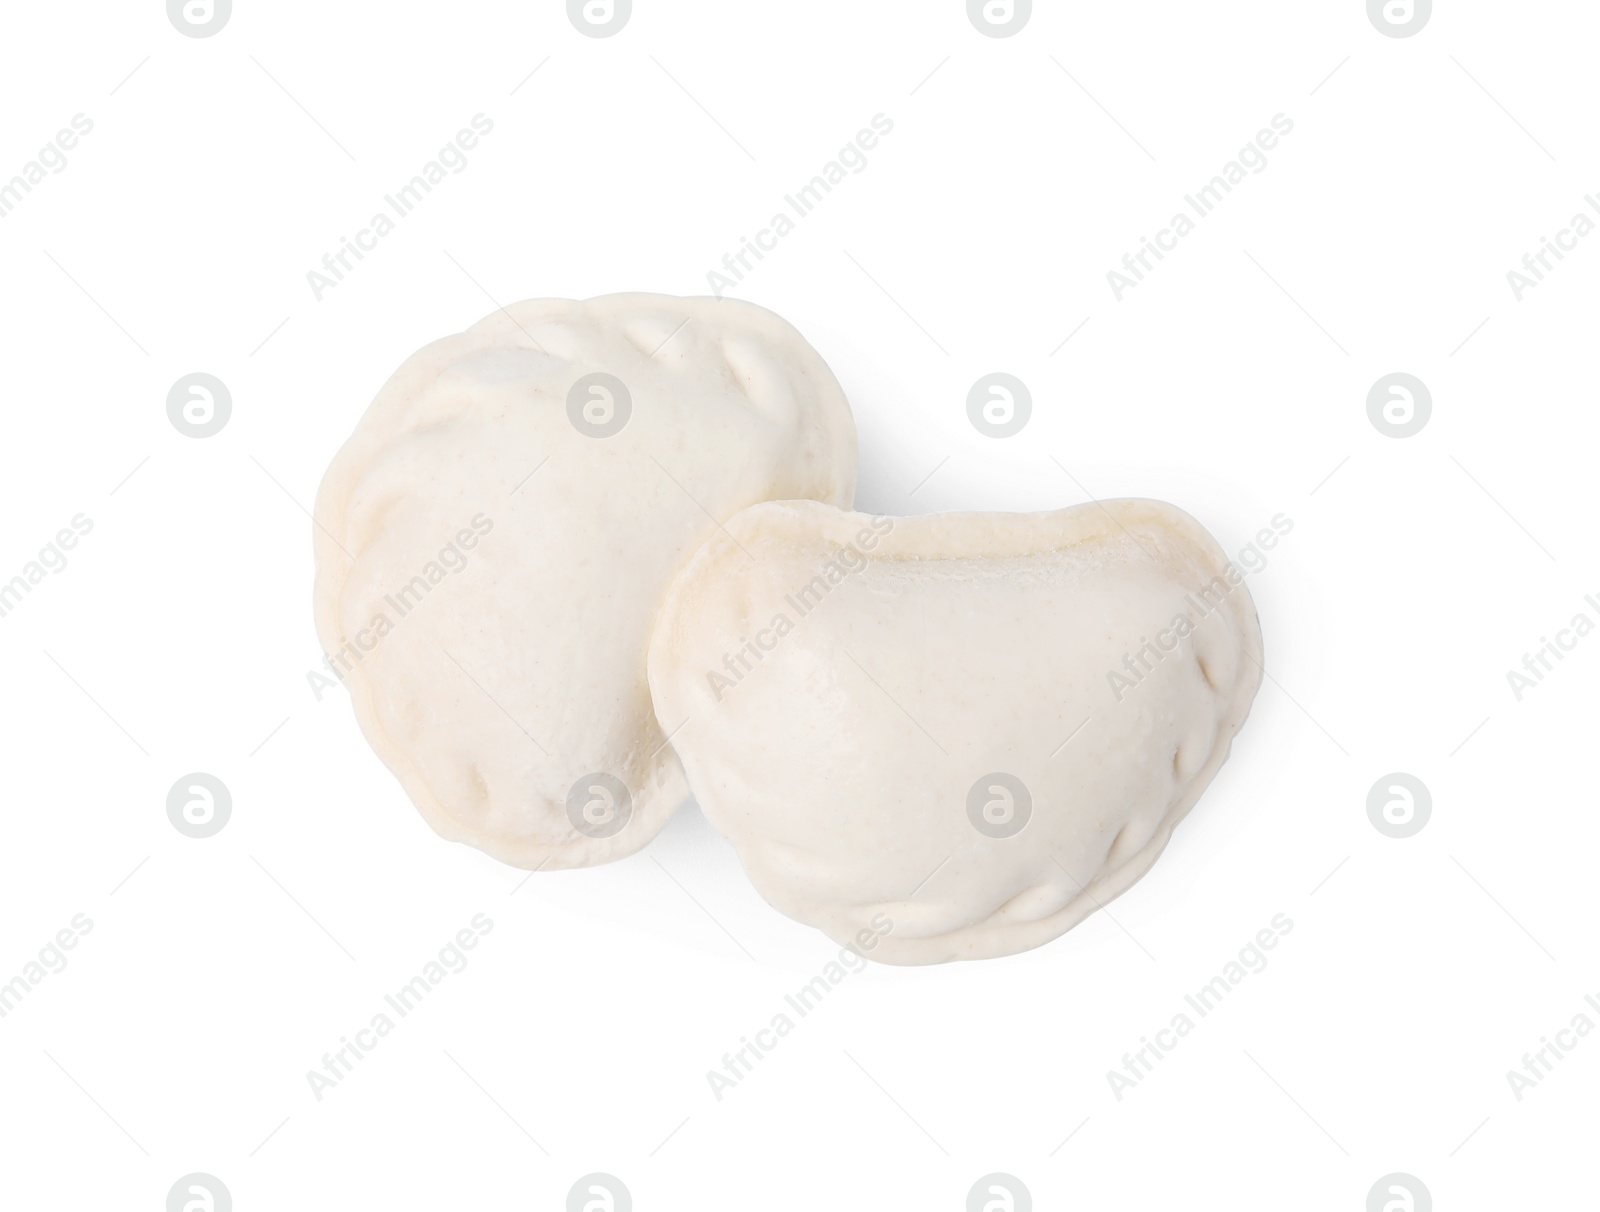 Photo of Raw dumplings (varenyky) isolated on white, top view